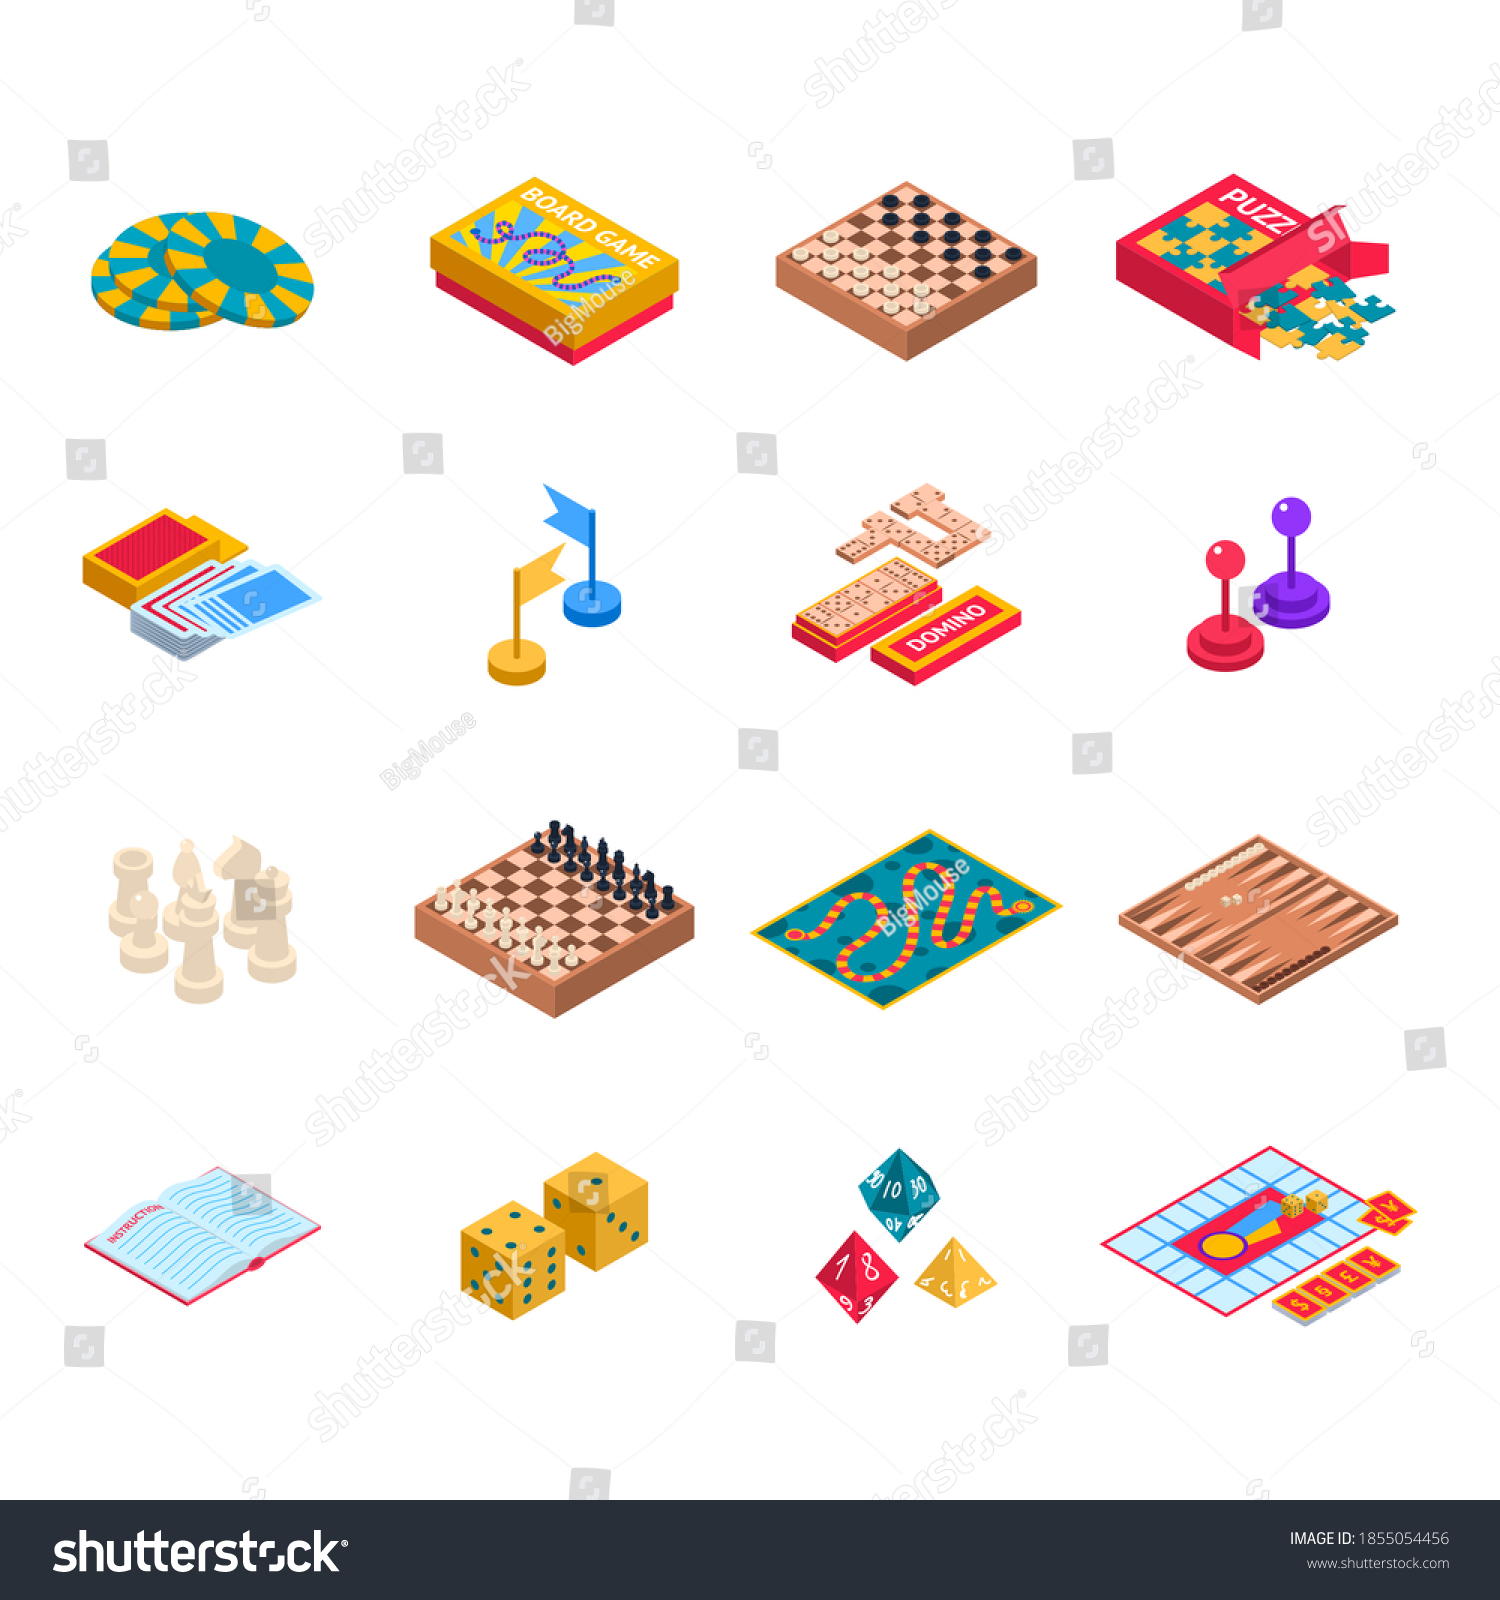 SVG of Color Board Games Icons Set 3d Isometric View Include of Domino, Chess, Dice and Puzzle. Vector illustration of Icon svg